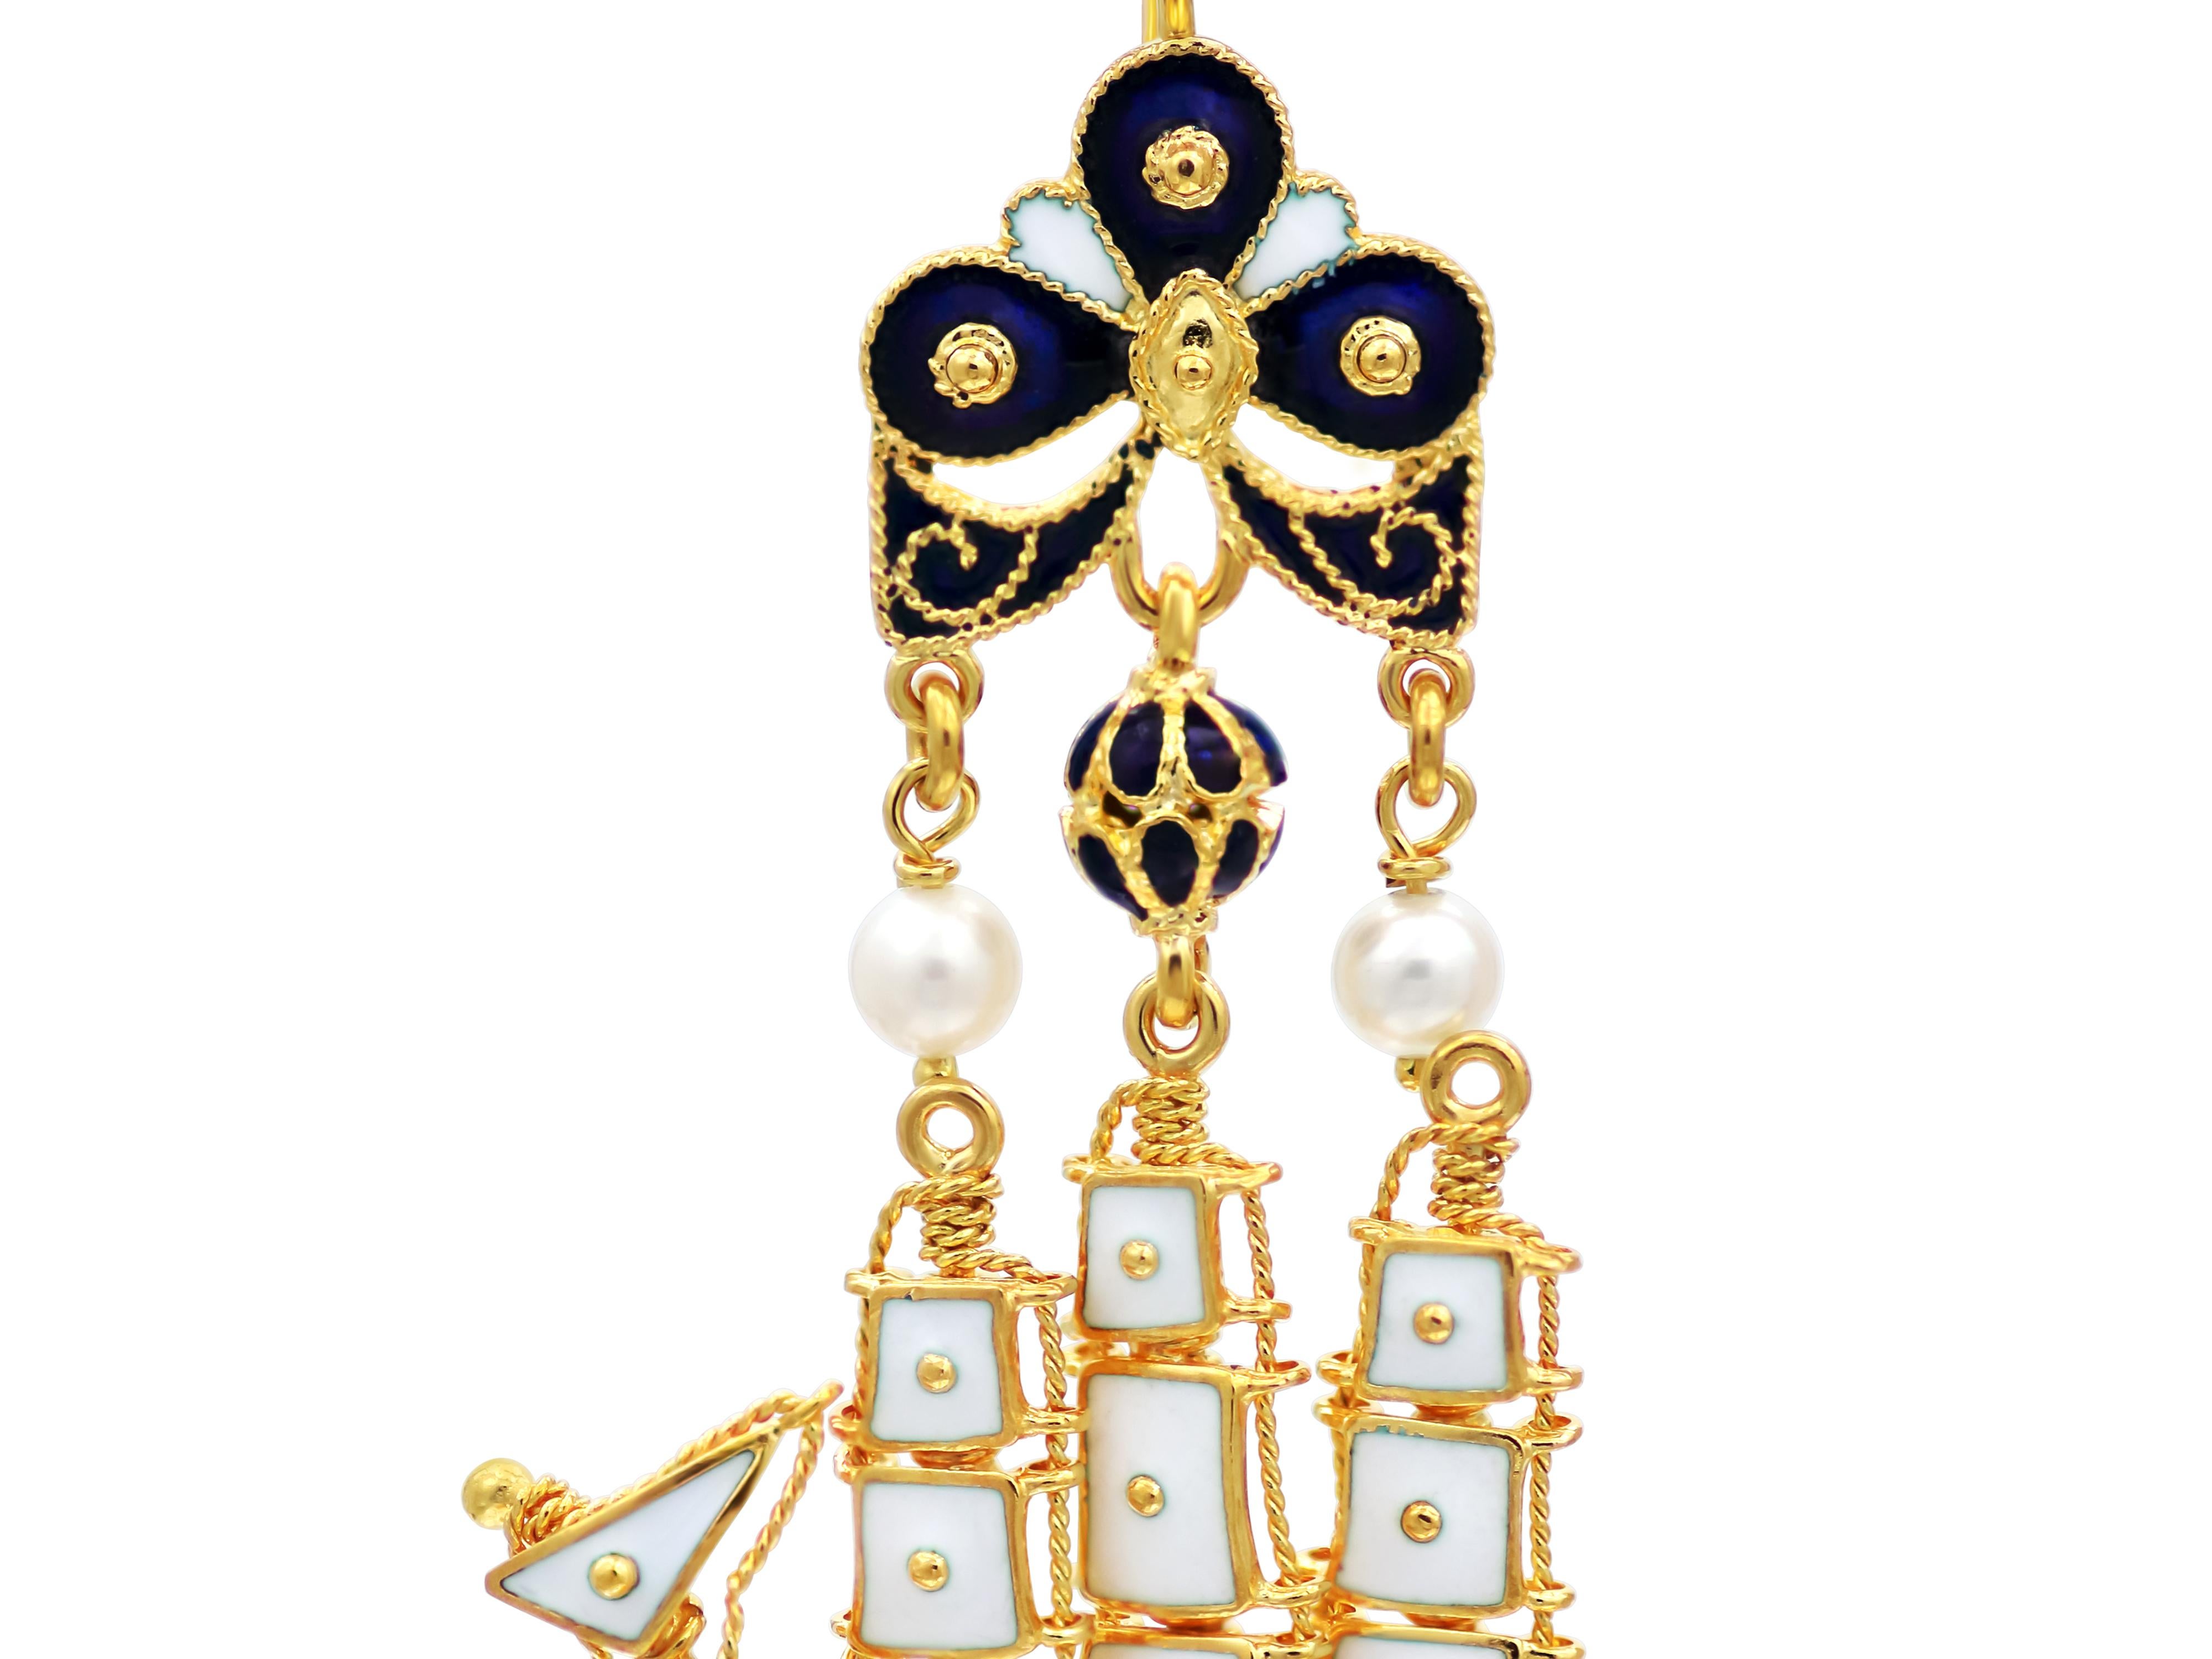 Boat earrings in 18k gold and enamel. Incredible detail workmanship with over 30 pieces complete this masterpiece. A Museum replica from the Benaki museum in Athens,  Greece. Worldwide famous artifact can be easily be a subject of conversation and a